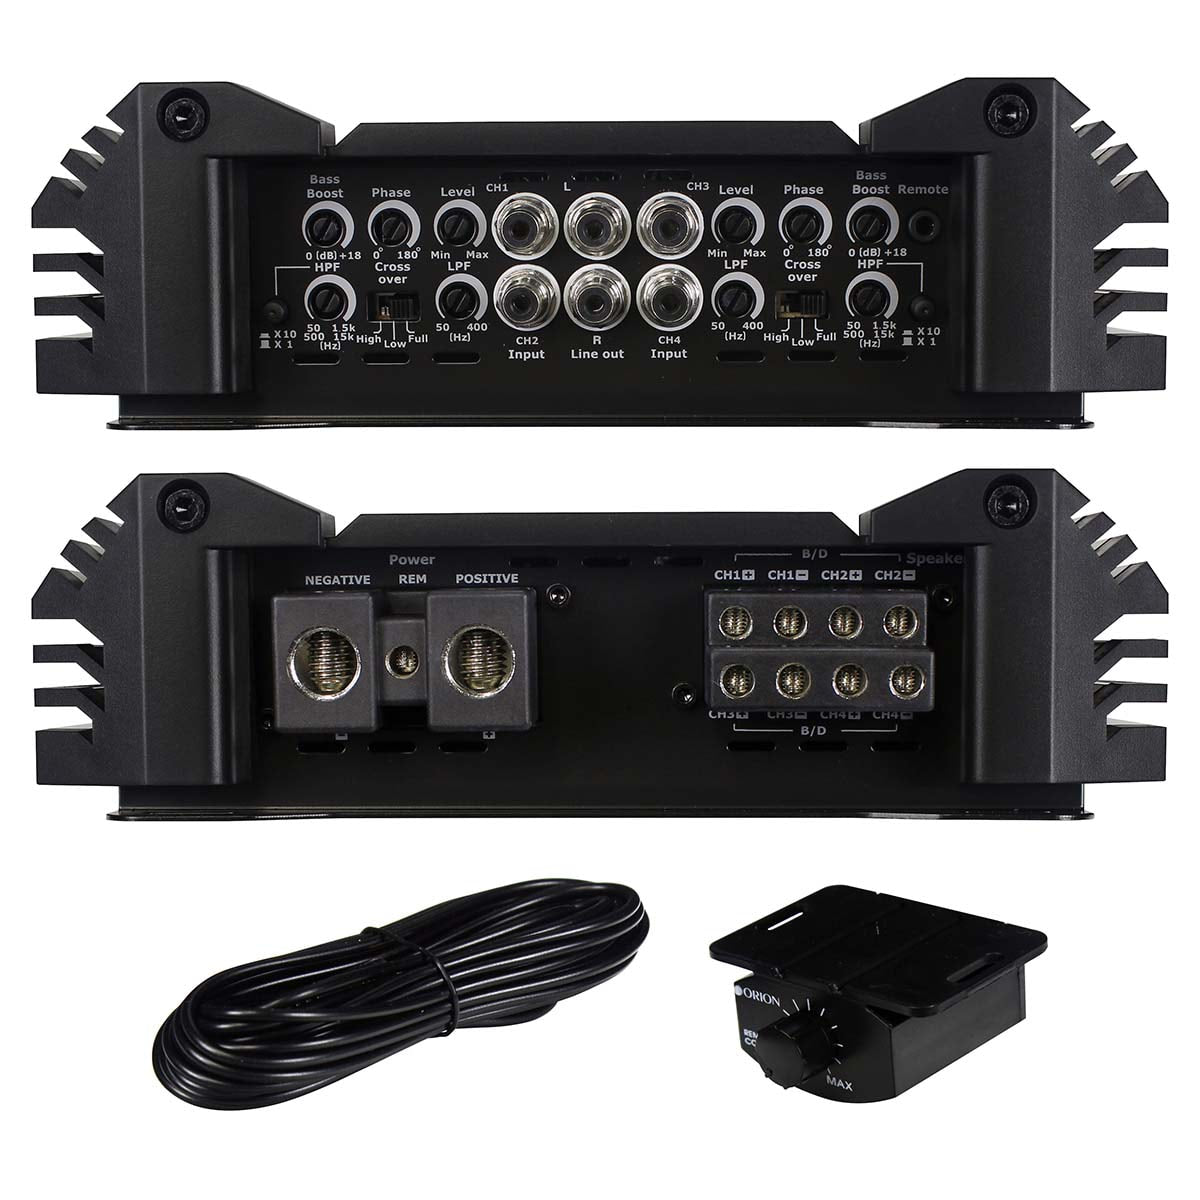 Orion 4 Channel Amplifier, 2500 RMS/10000W MAX